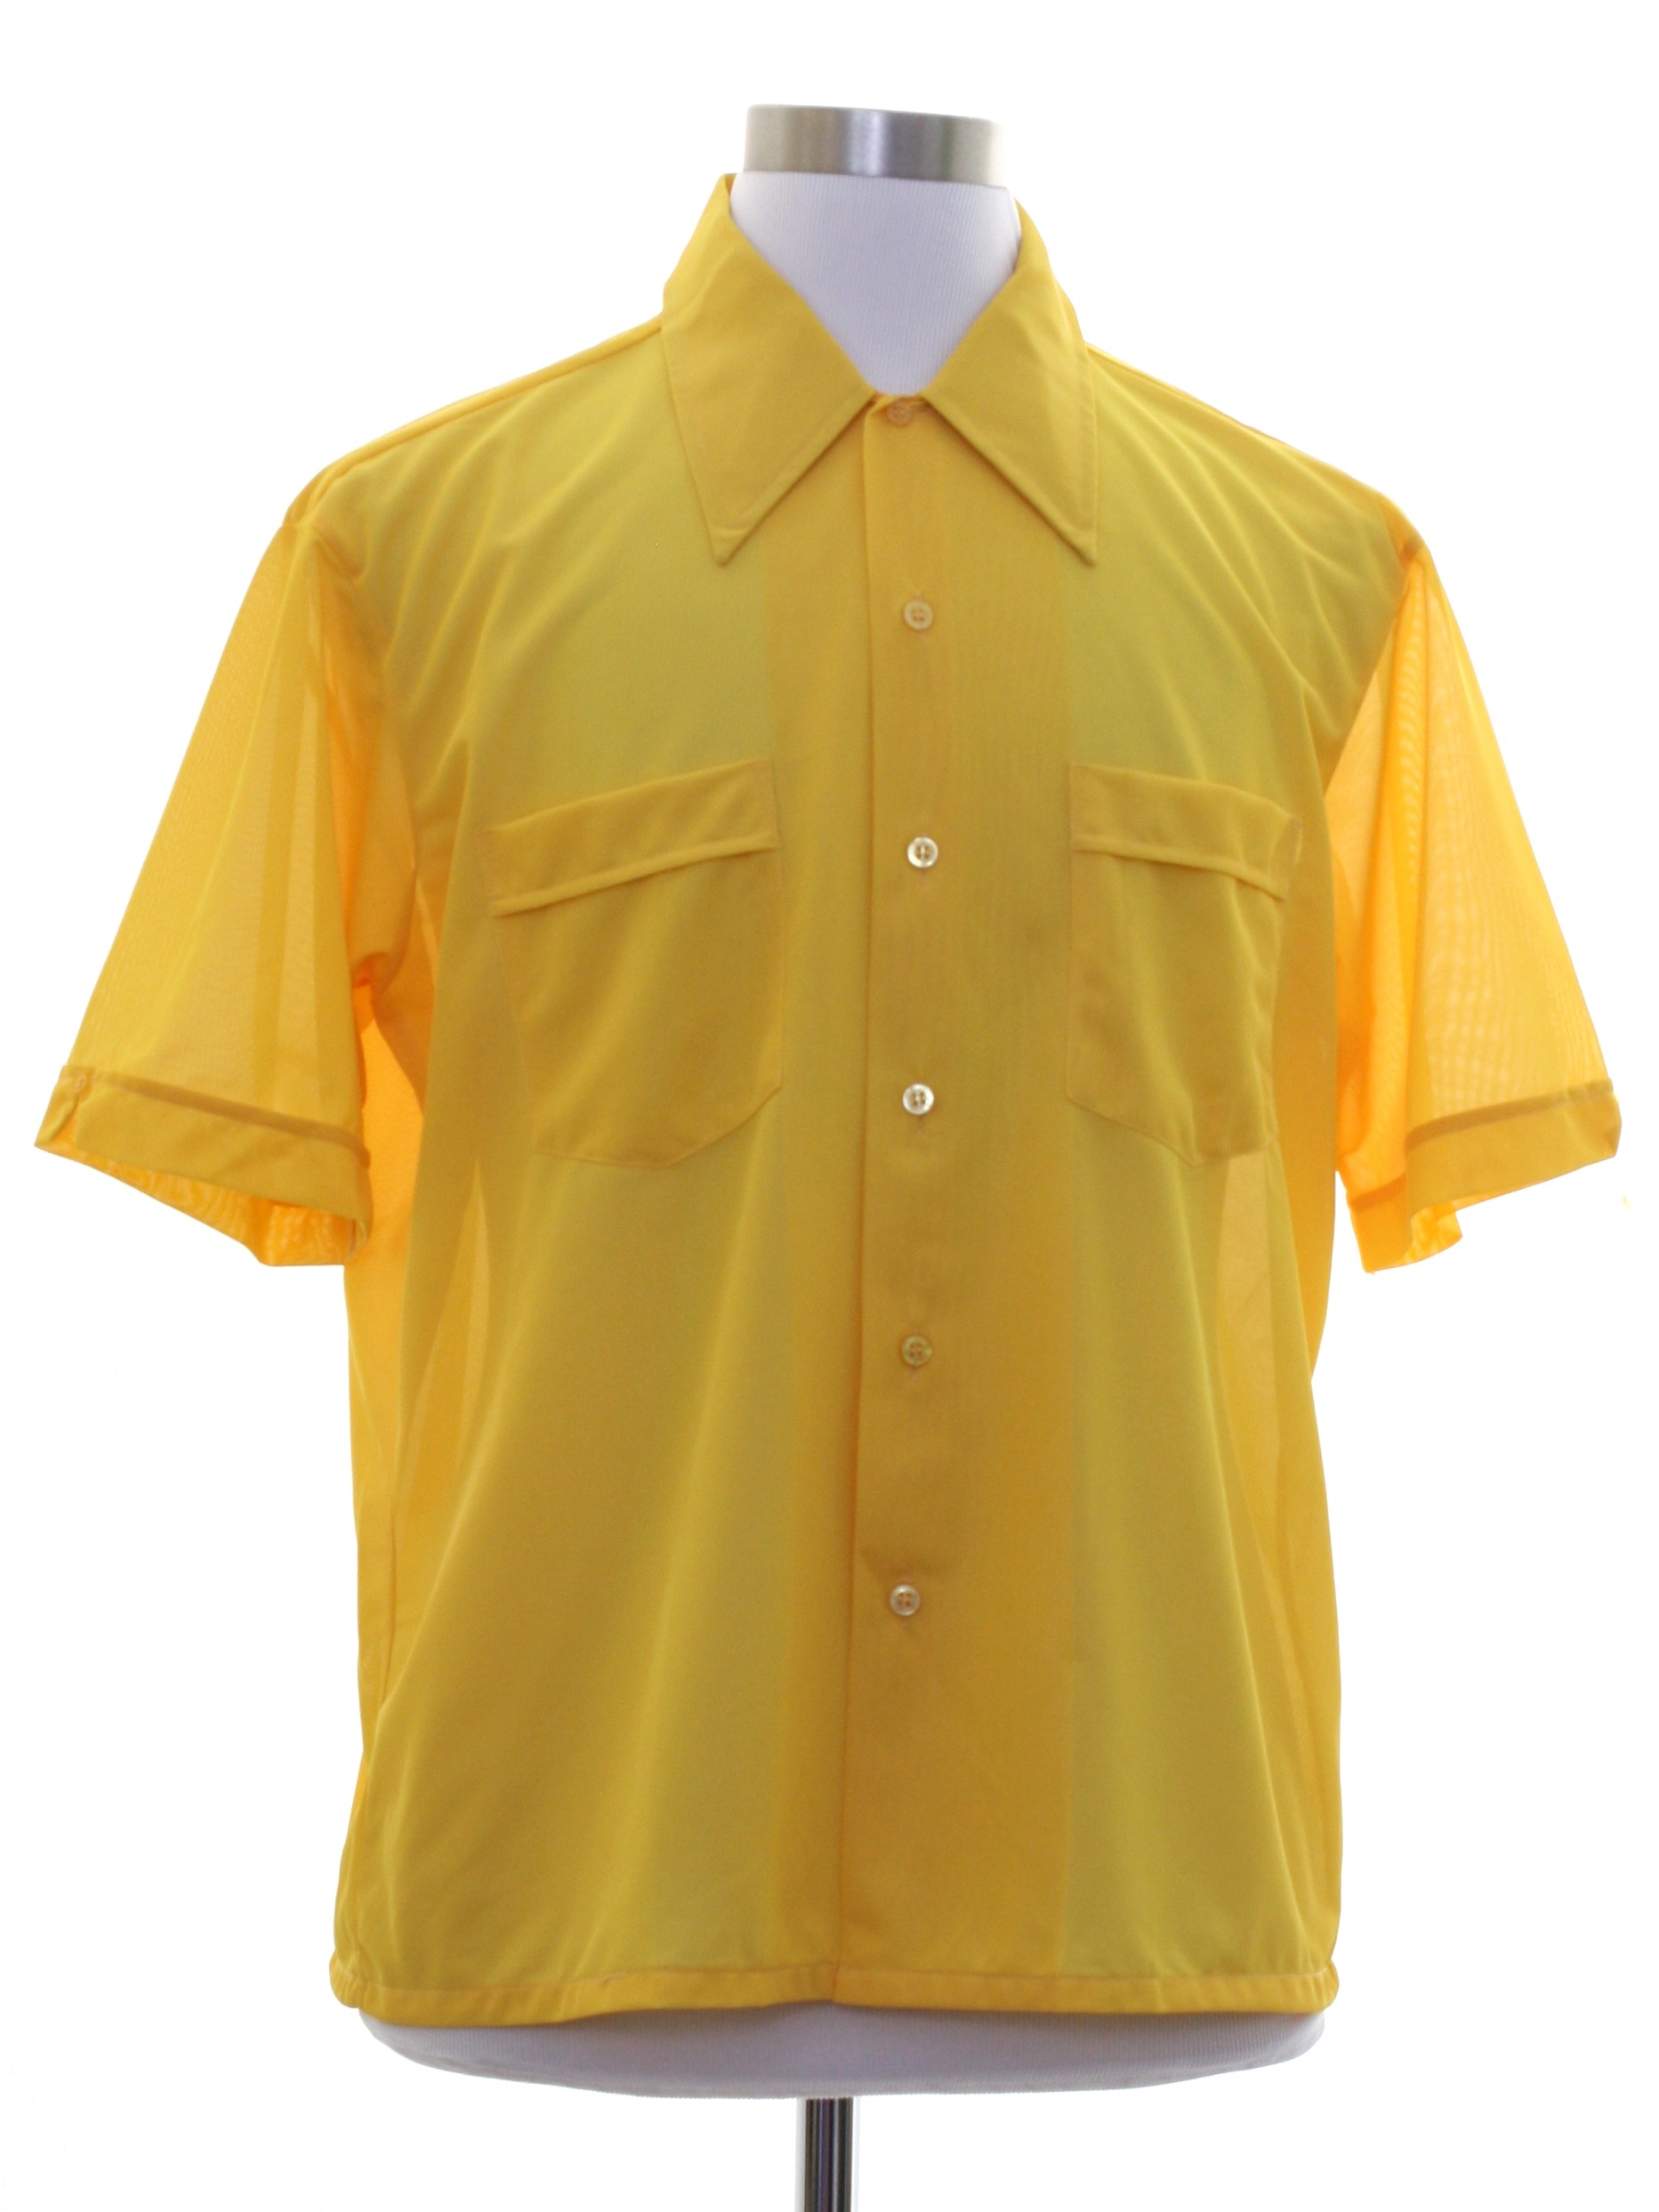 Retro Sixties Shirt: Late 60s or Early 70s -Grants- Mens sunflower gold ...